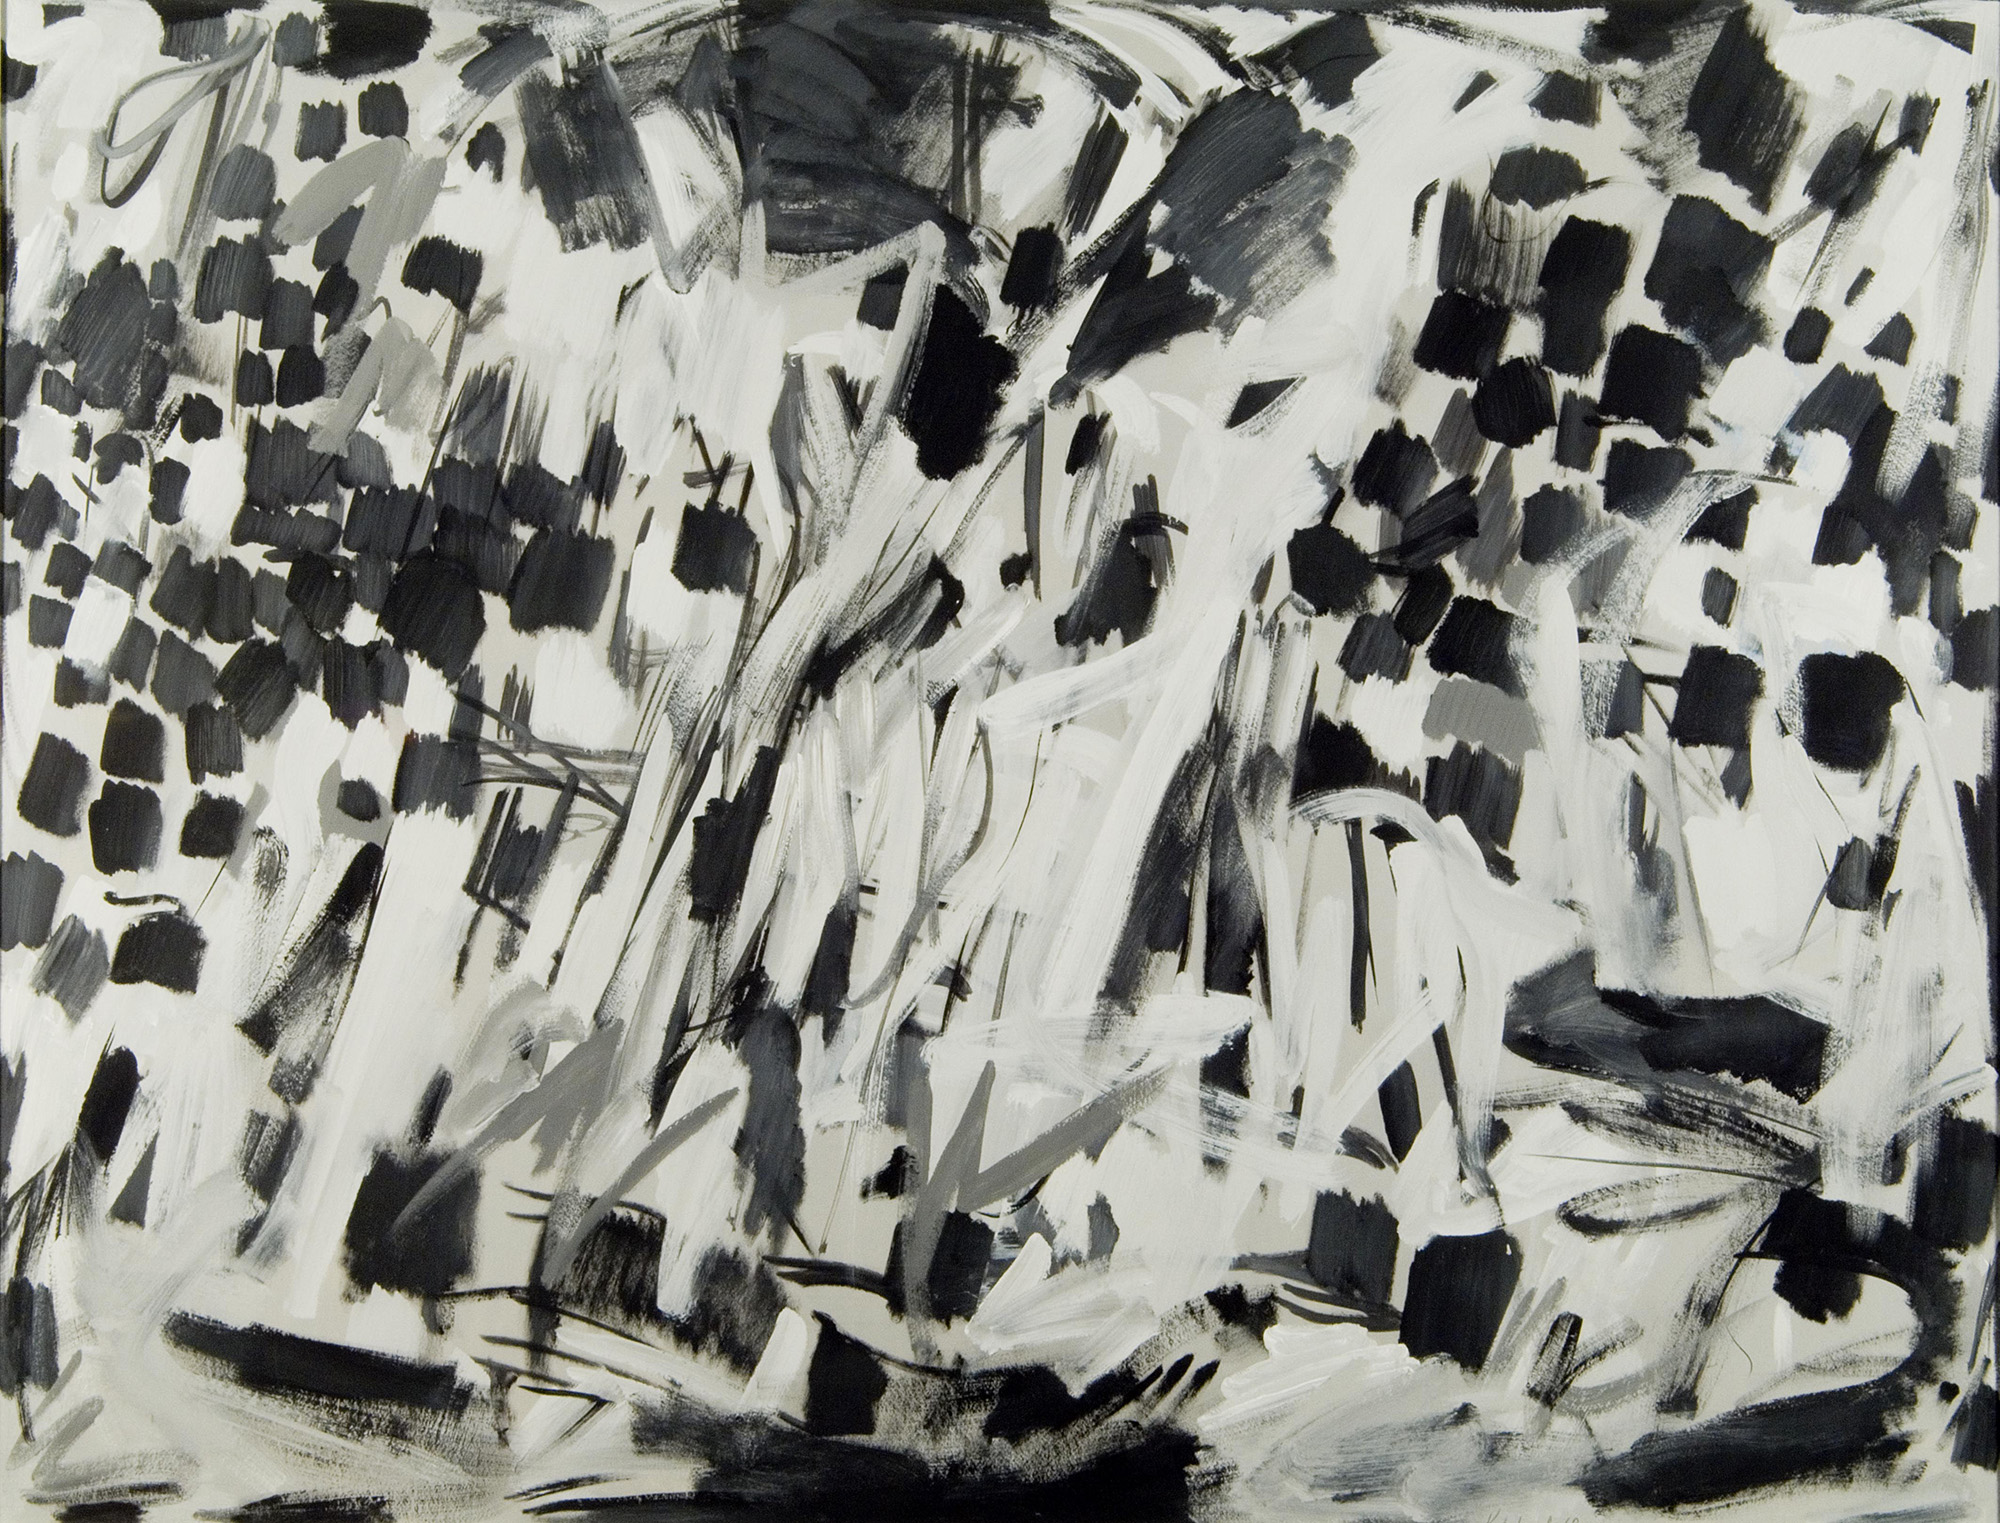 Abstract image of black, white, and grey brushstrokes. Top right and left with wider black brushstrokes. 